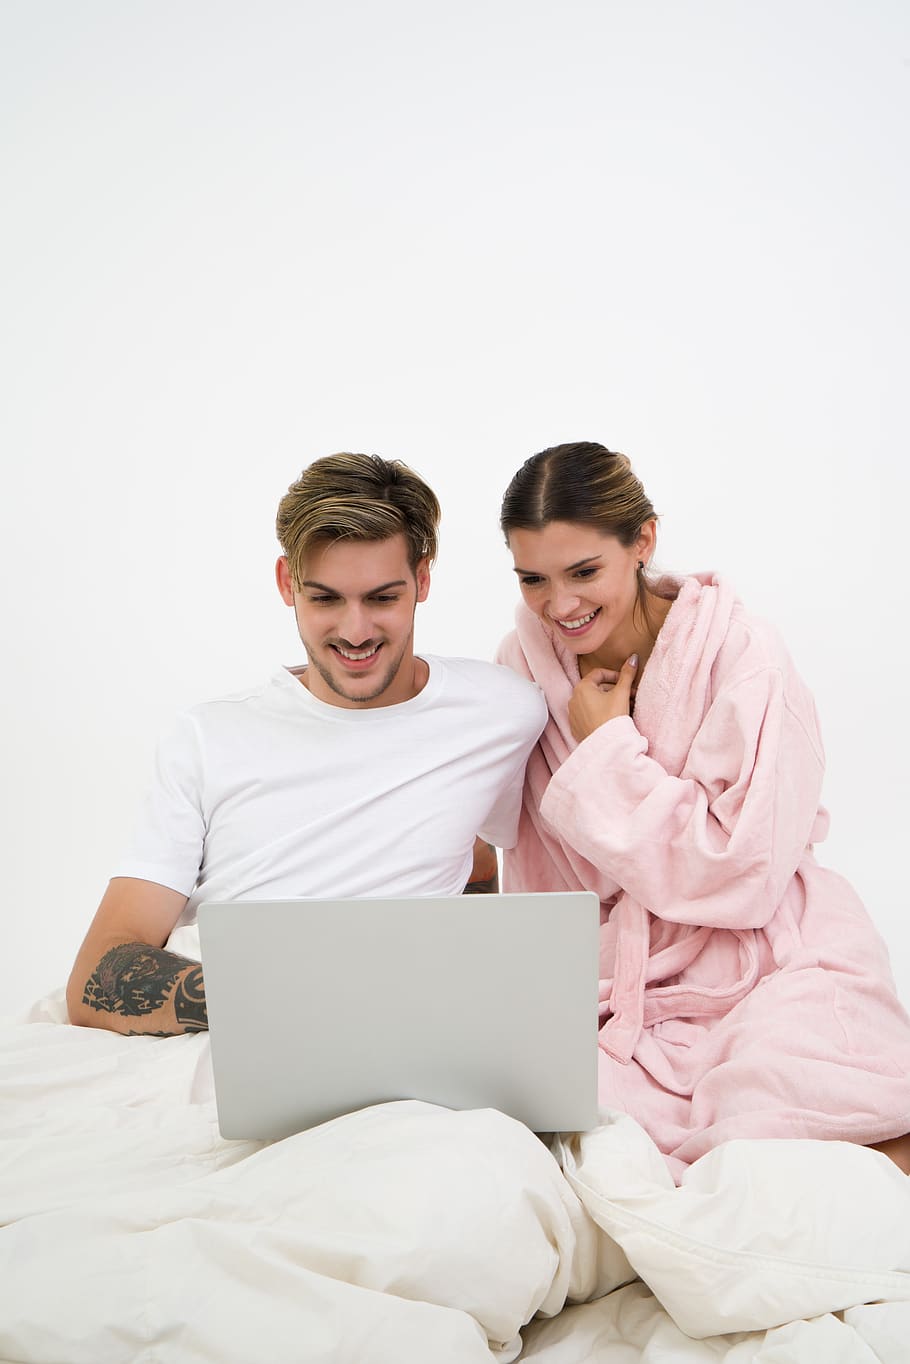 Man in White Crew-neck Shirt Sitting on Bed Beside Woman in Pink Bathrobe Looking at Laptop Computer, HD wallpaper